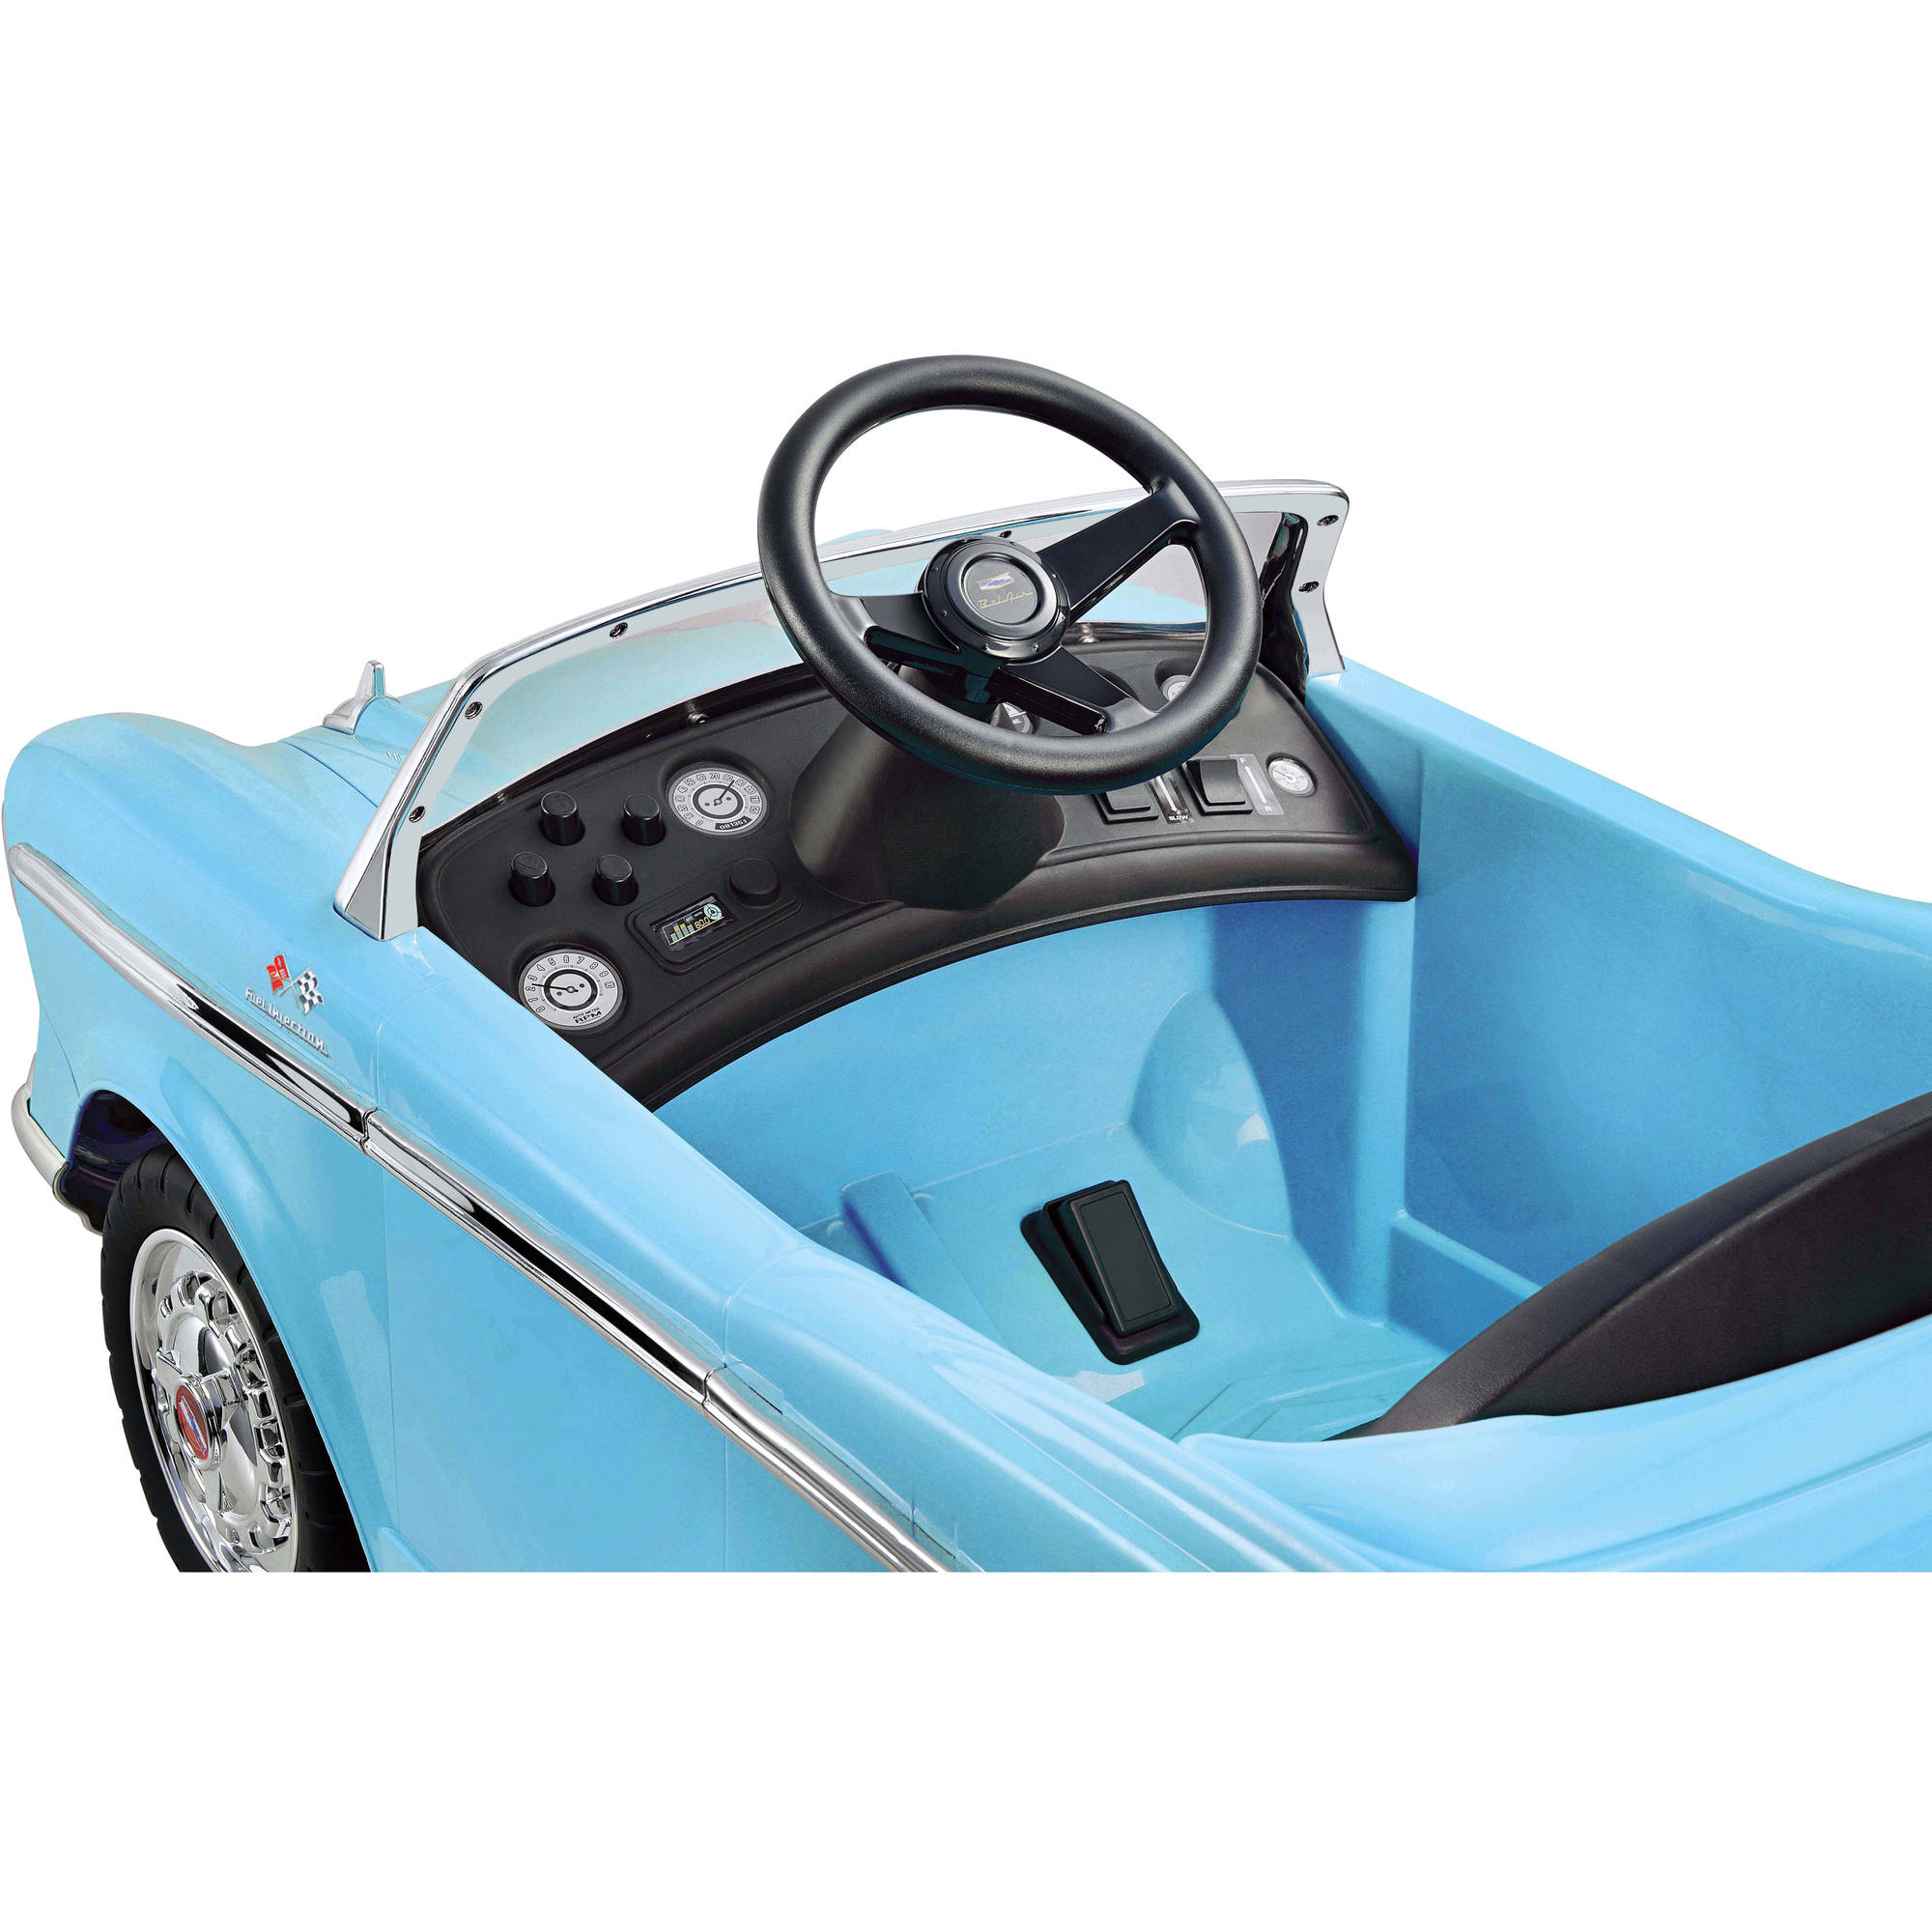 Kid Motorz 12V Chevy Bel Air Battery-Powered Ride-on in Light Blue - image 3 of 6